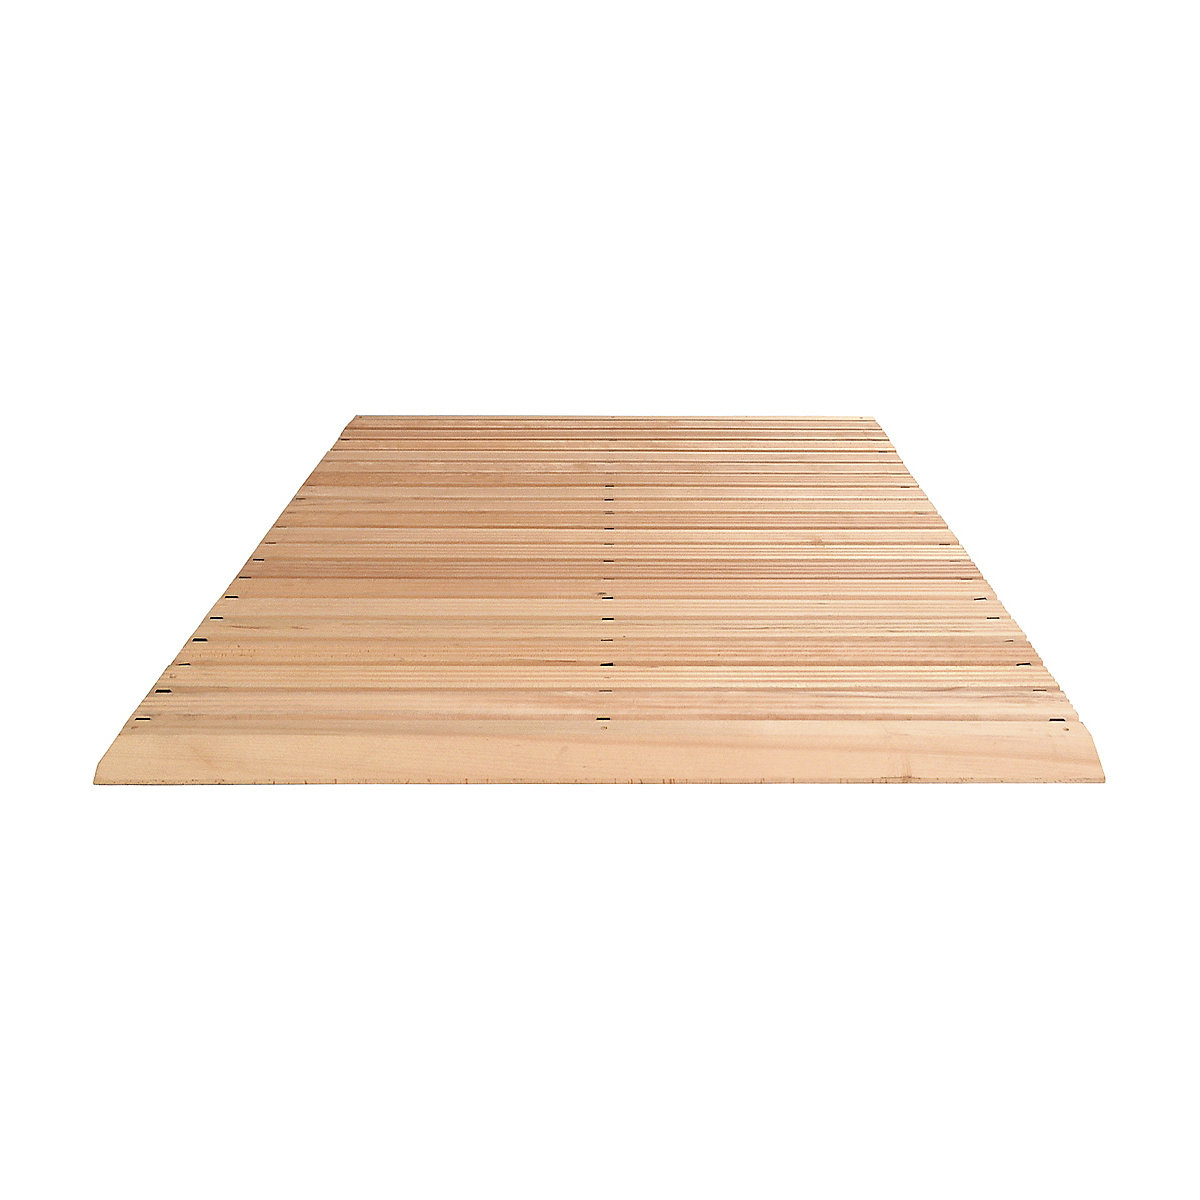 Wooden safety grid, per metre, with bevelled edges on 3 sides, width 1200 mm